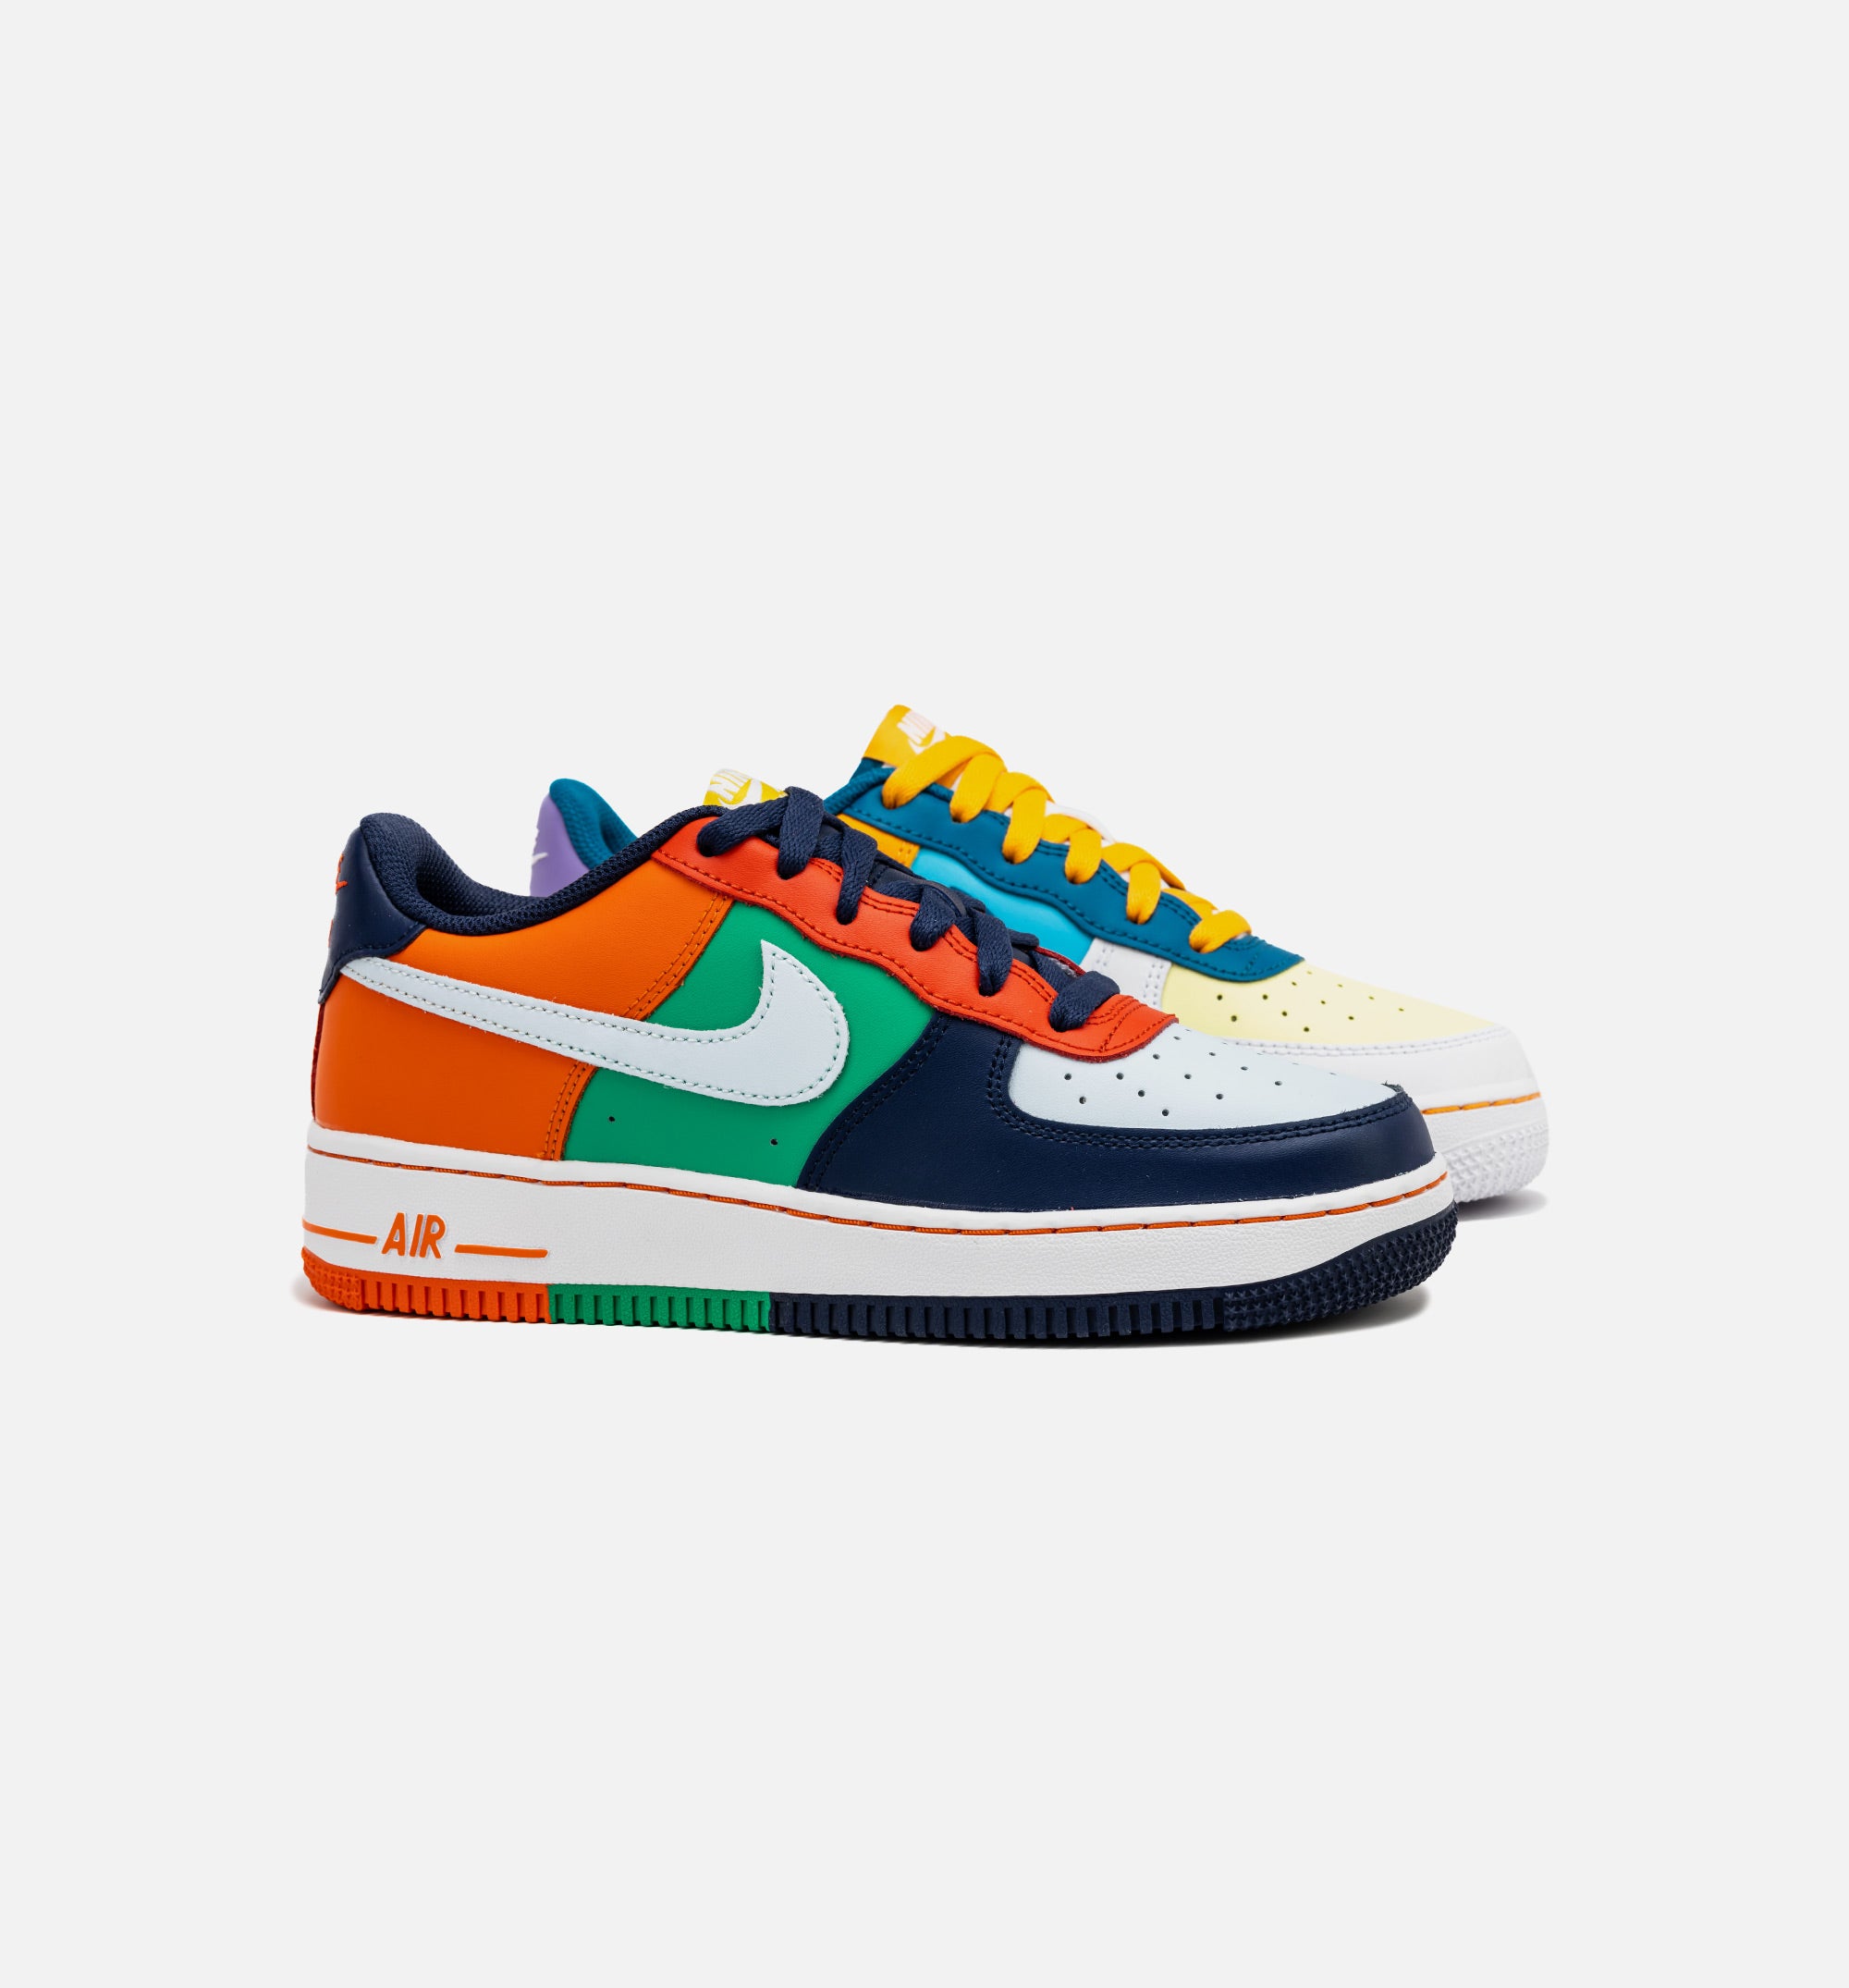 Nike FQ8368-902 Air Force 1 LV8 What The Grade School Lifestyle Shoe ...